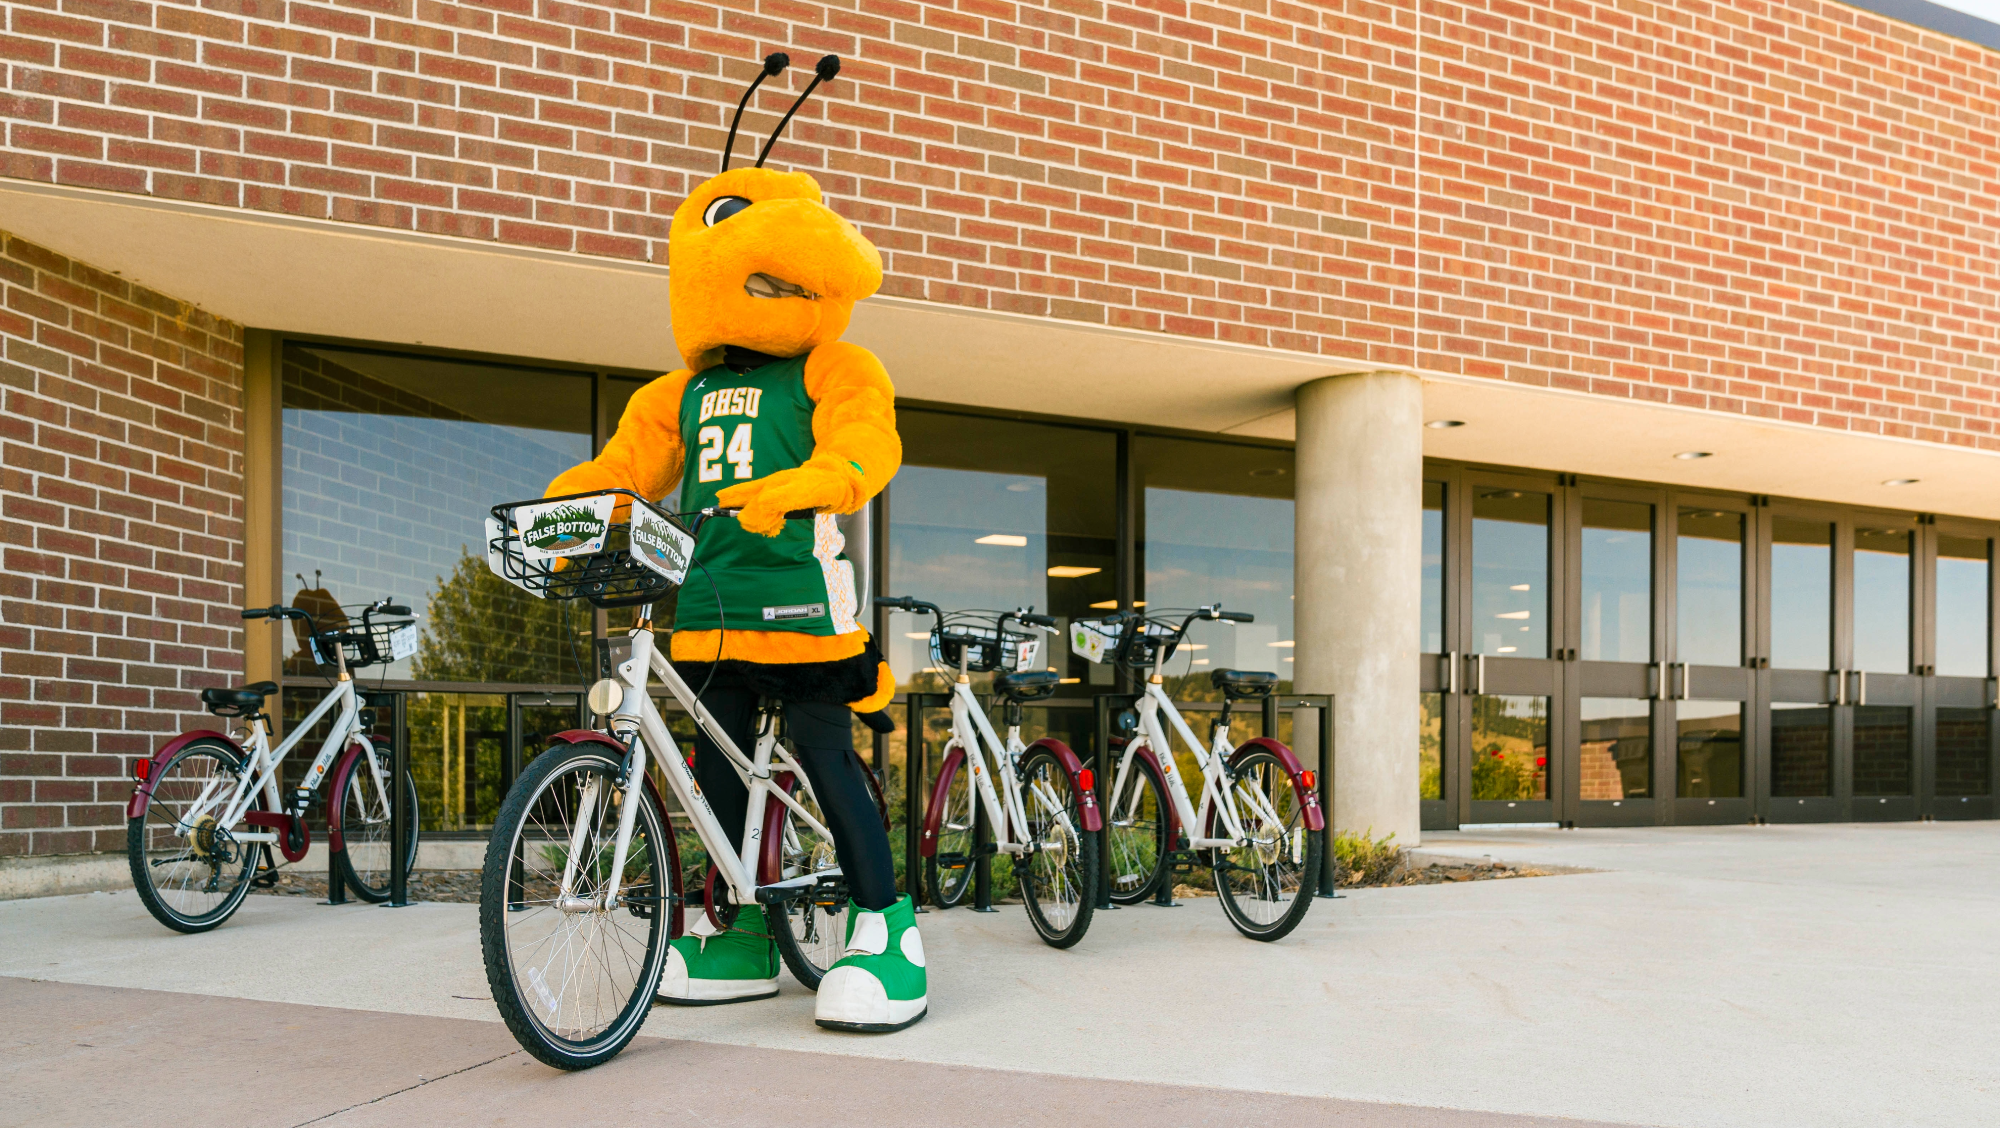 BHSU mascot, Sting, riding a bike in front of the Young Center